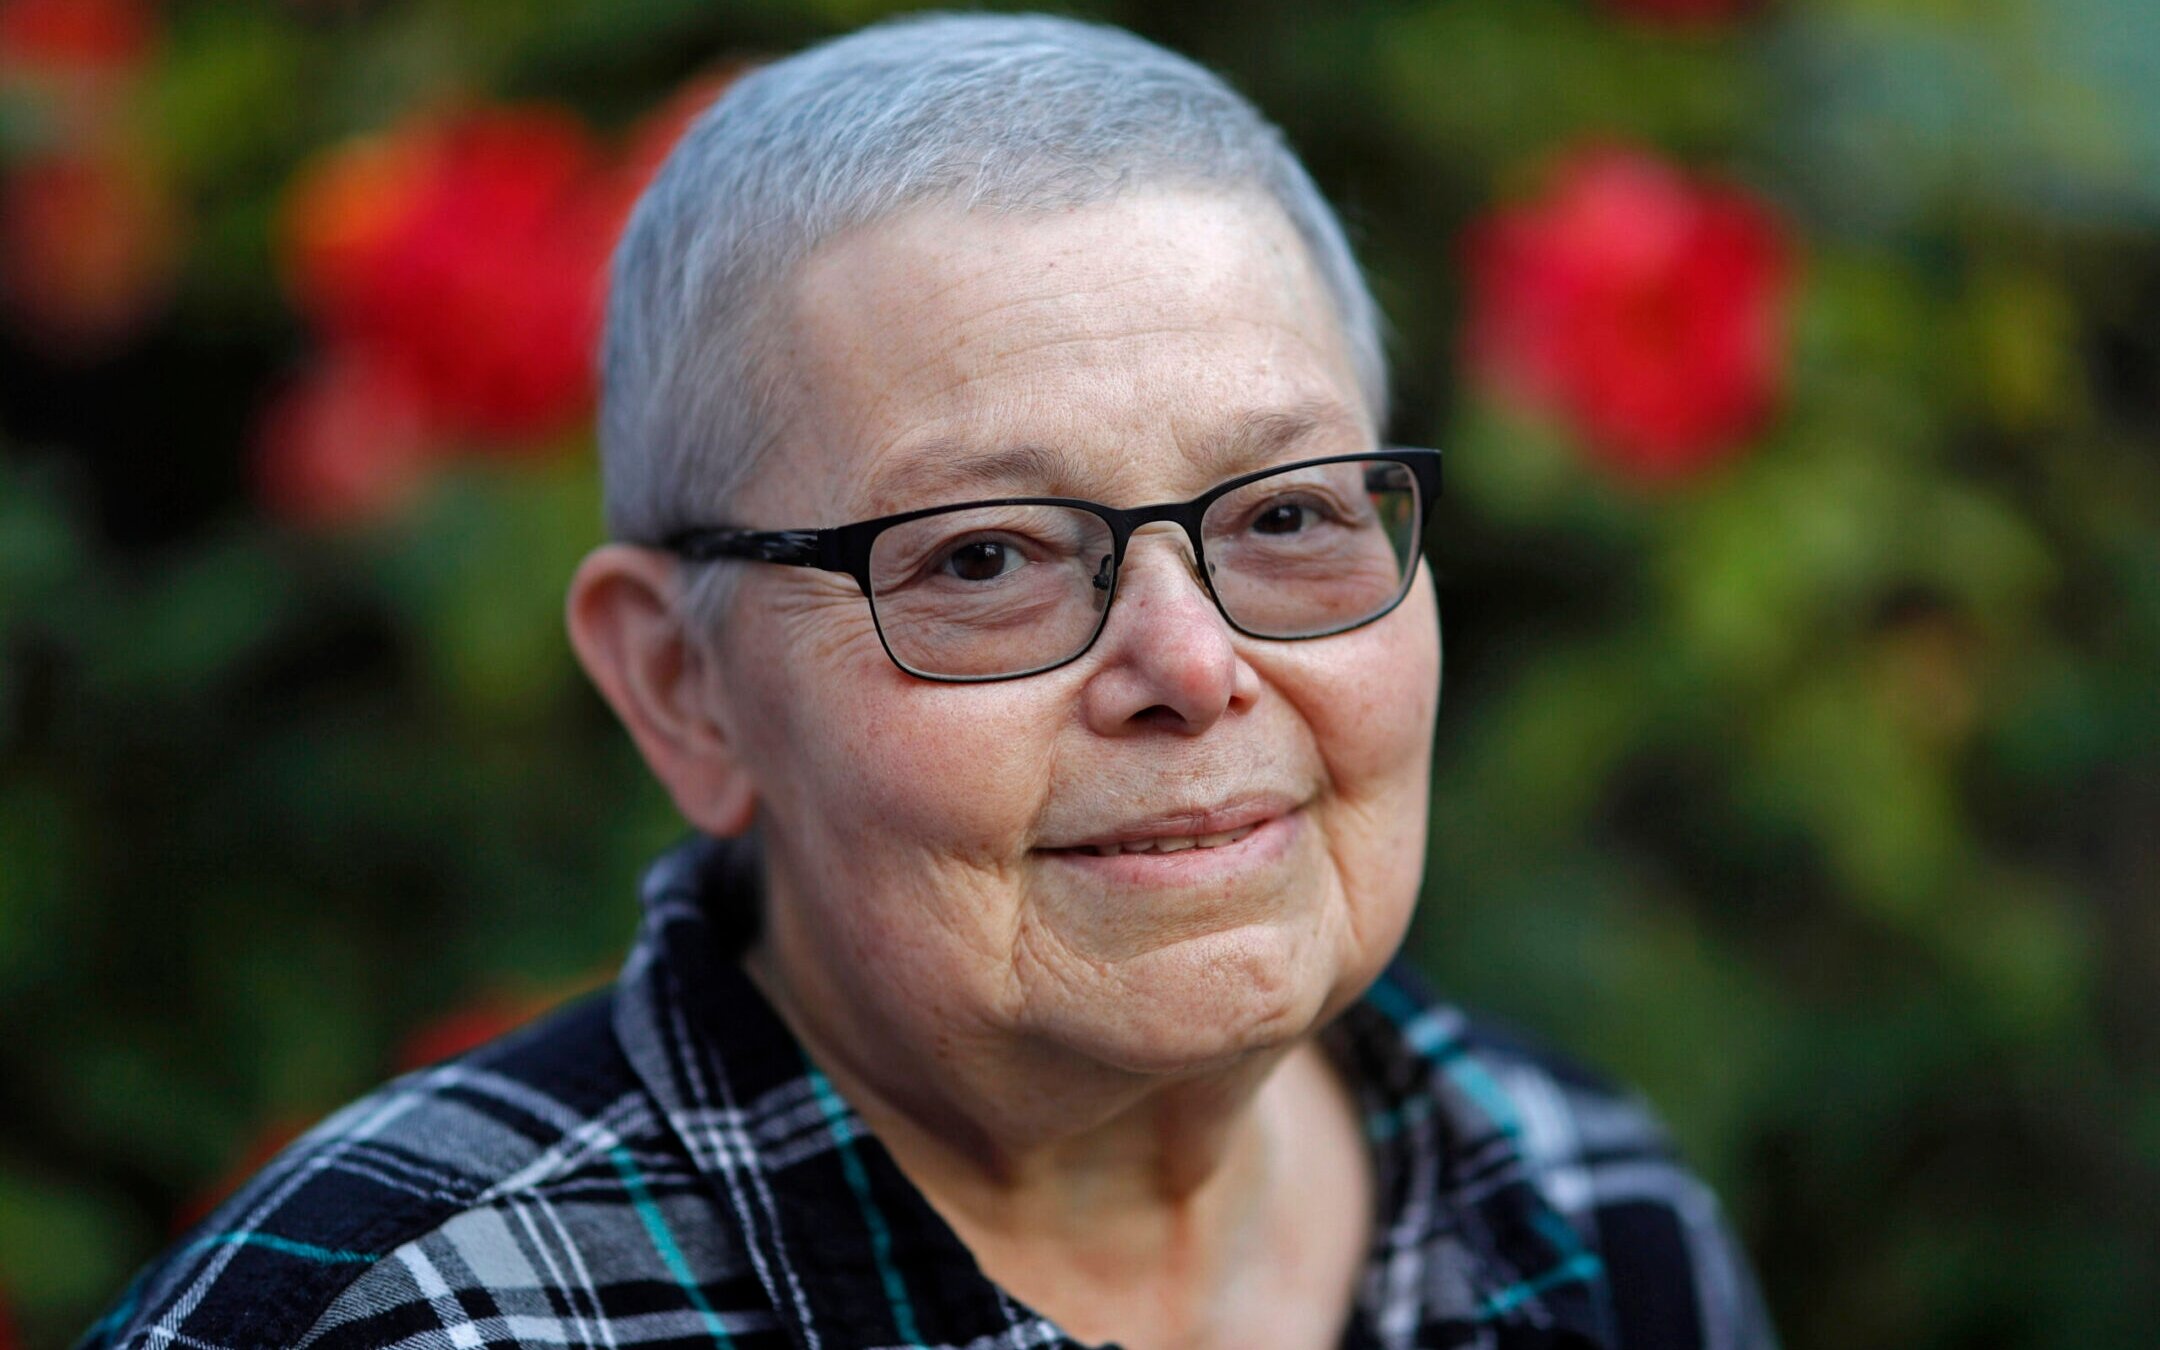 Lesbian author, poet and playwright Elana Dykewomon, photographed at her home in Oakland, Calif., on May 1, 2022, died Aug. 7, 2022. (Jane Tyska/Digital First Media/East Bay Times via Getty Images)